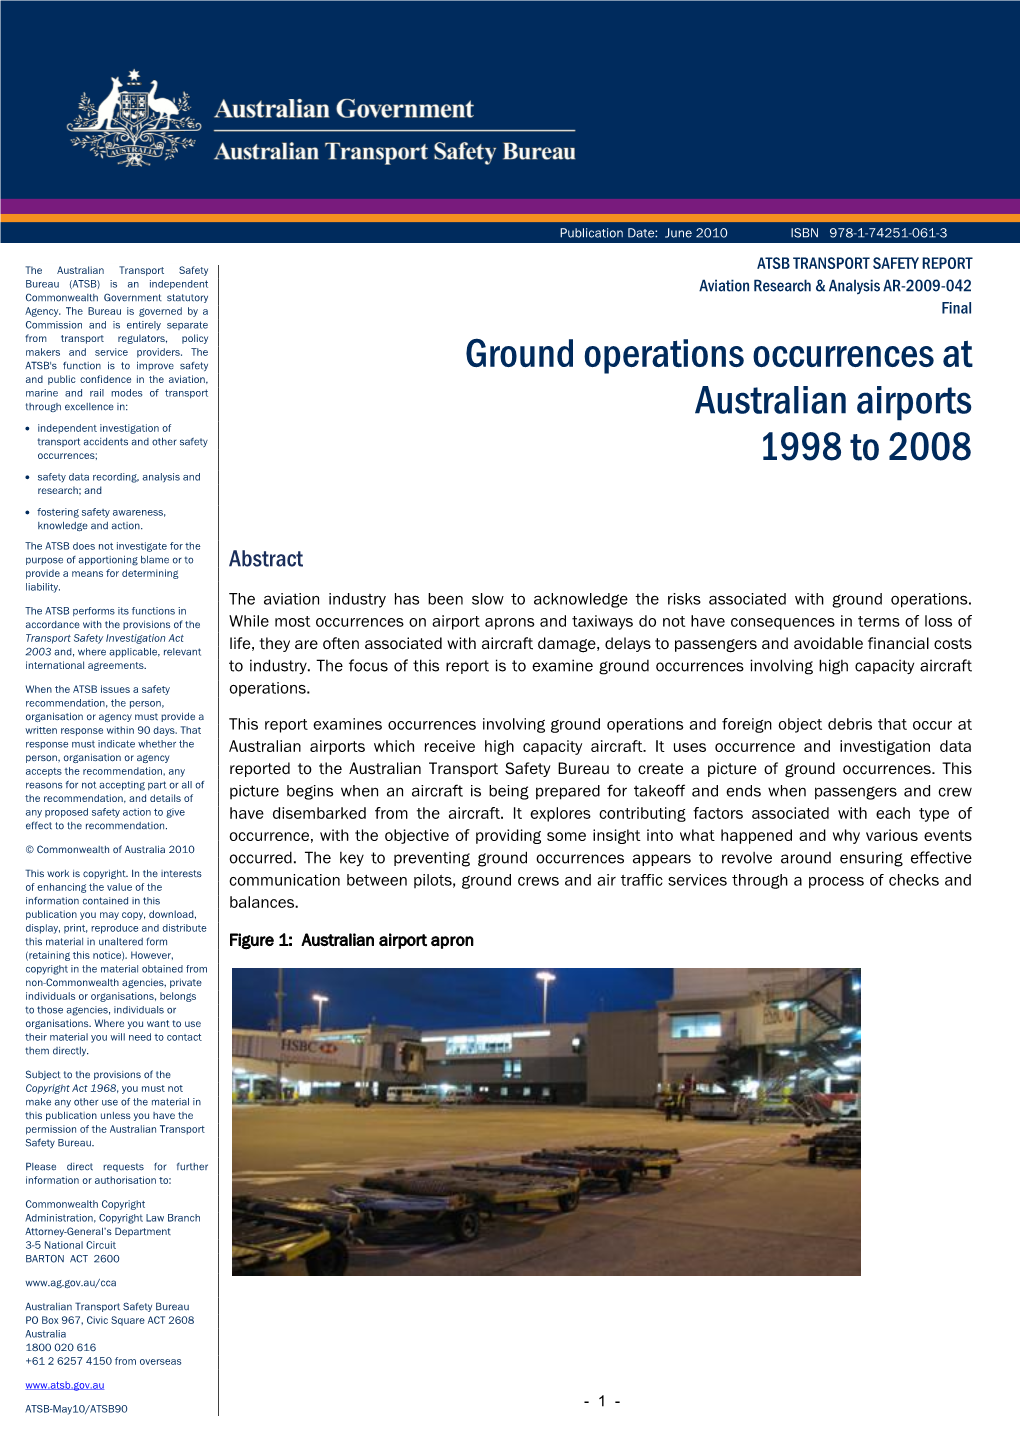 Ground Operations Occurrences at Australian Airports 1998 to 2008